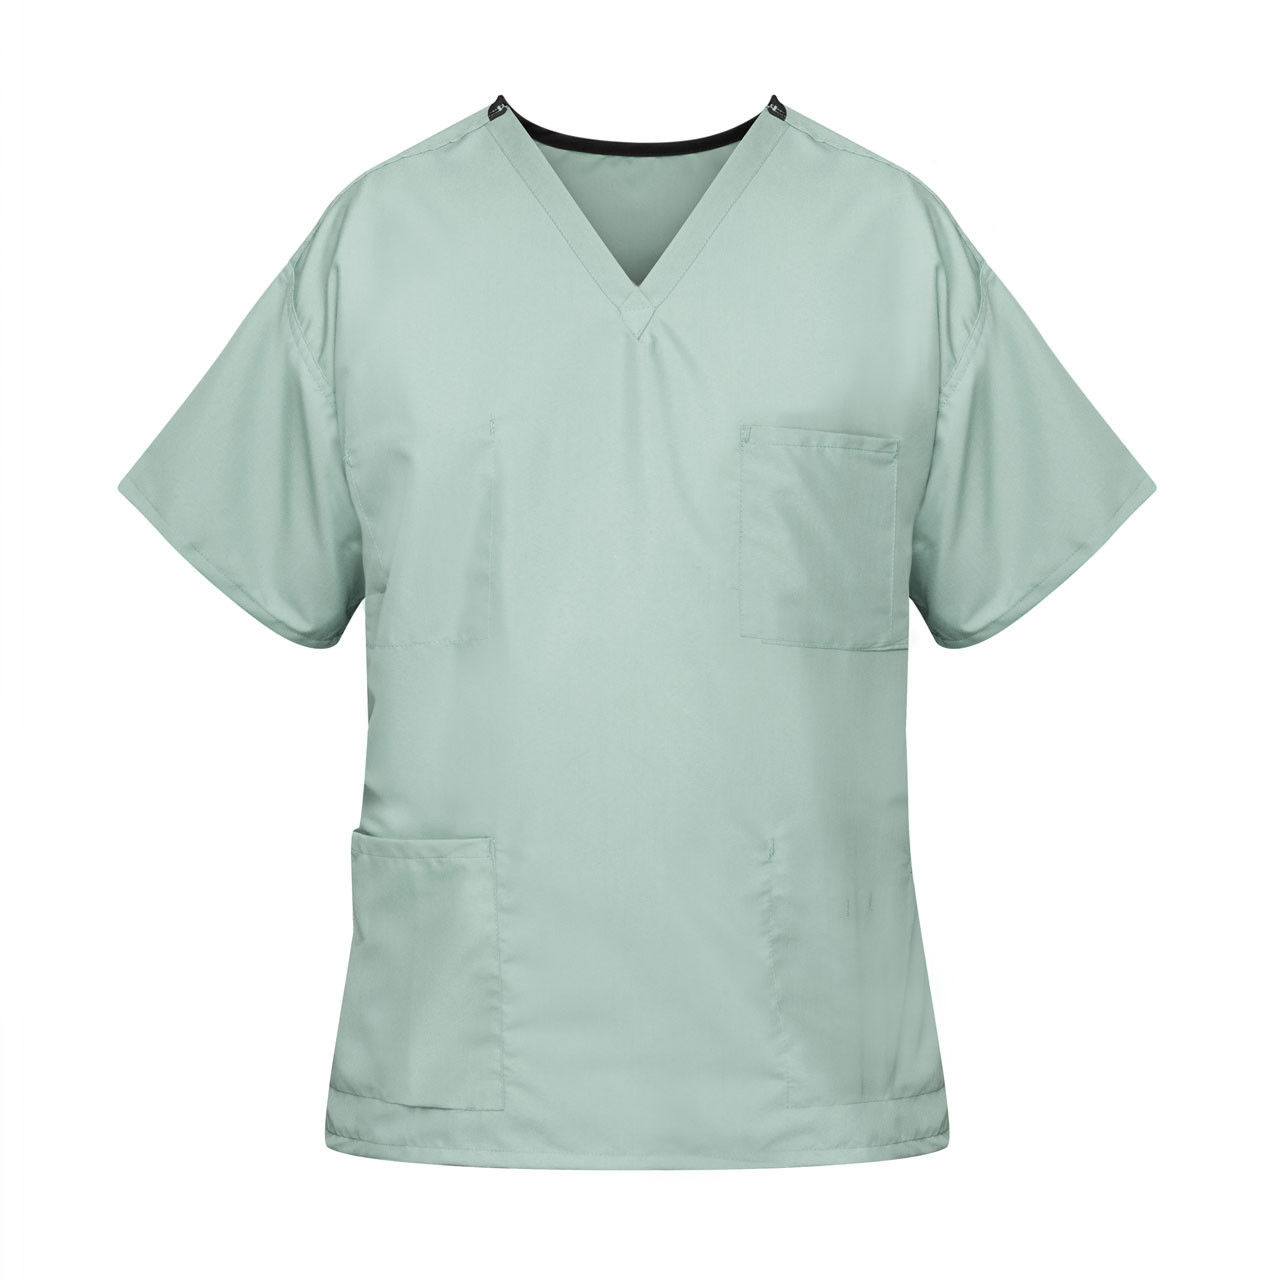 Do the misty green scrubs have reversible inside pockets?